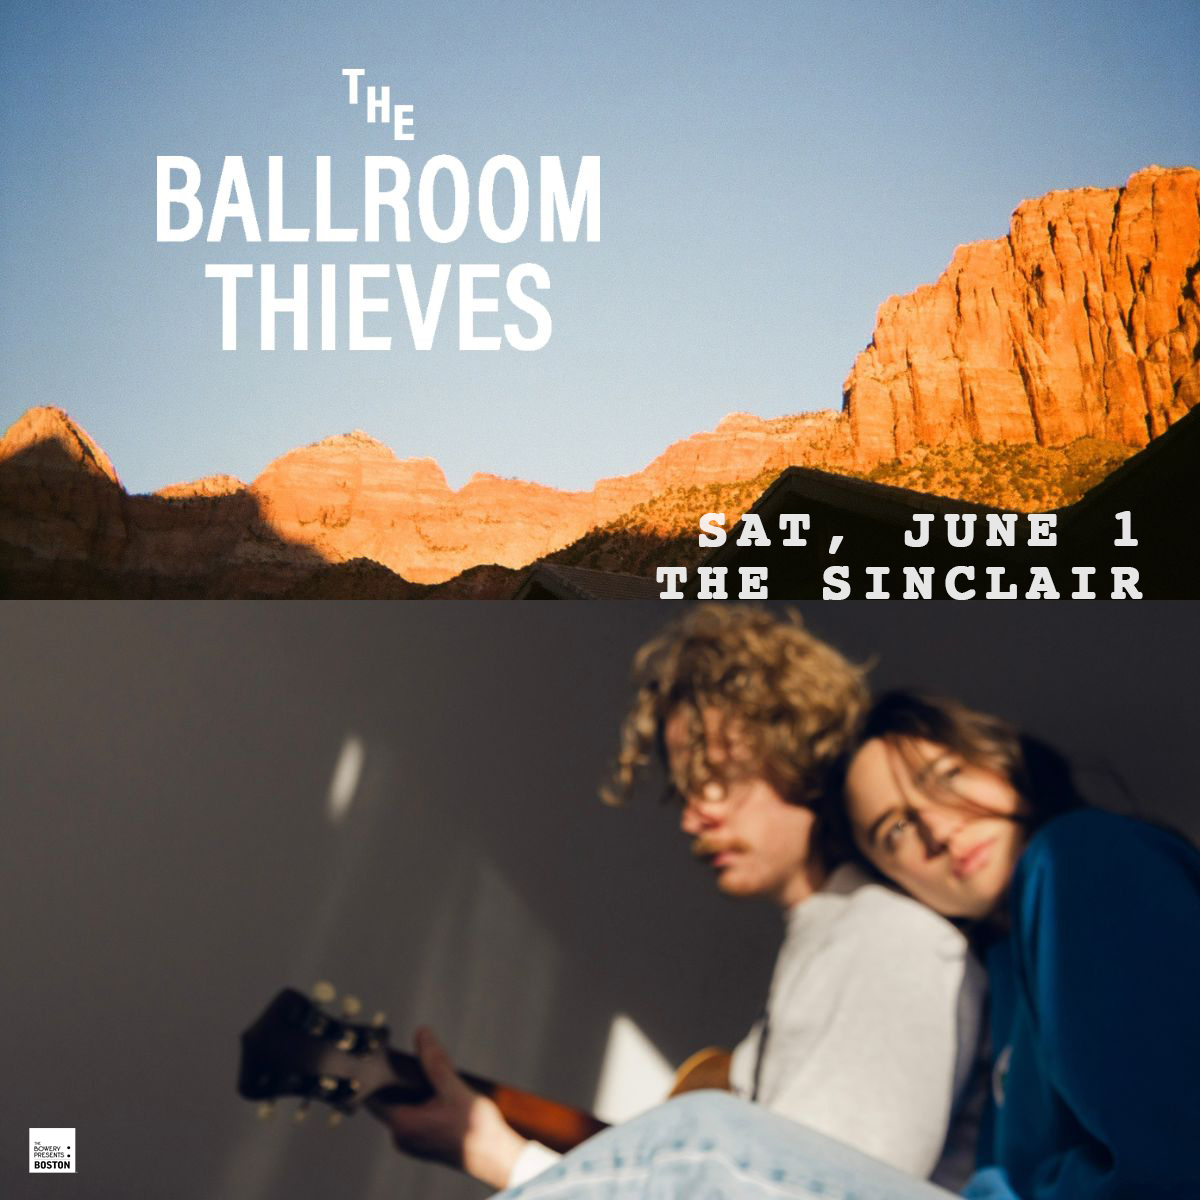 Bowery presale is live now! Get your tickets for the @BallroomThieves show on Saturday, June 1 ✨ CODE: 52CHURCHST → axs.com/events/531660/…